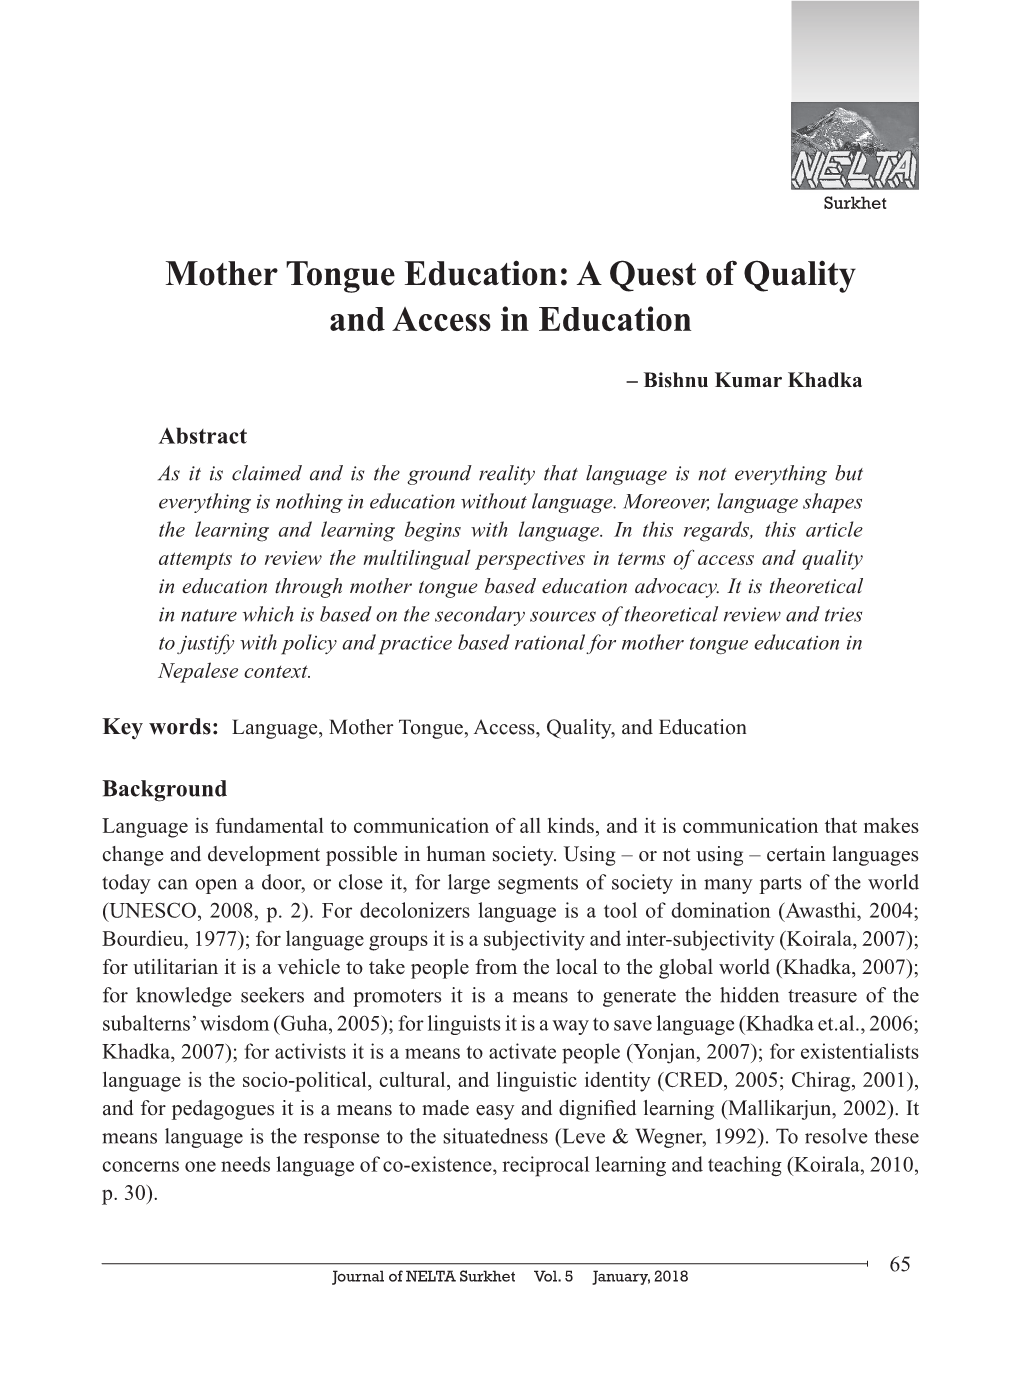 Mother Tongue Education: a Quest of Quality and Access in Education